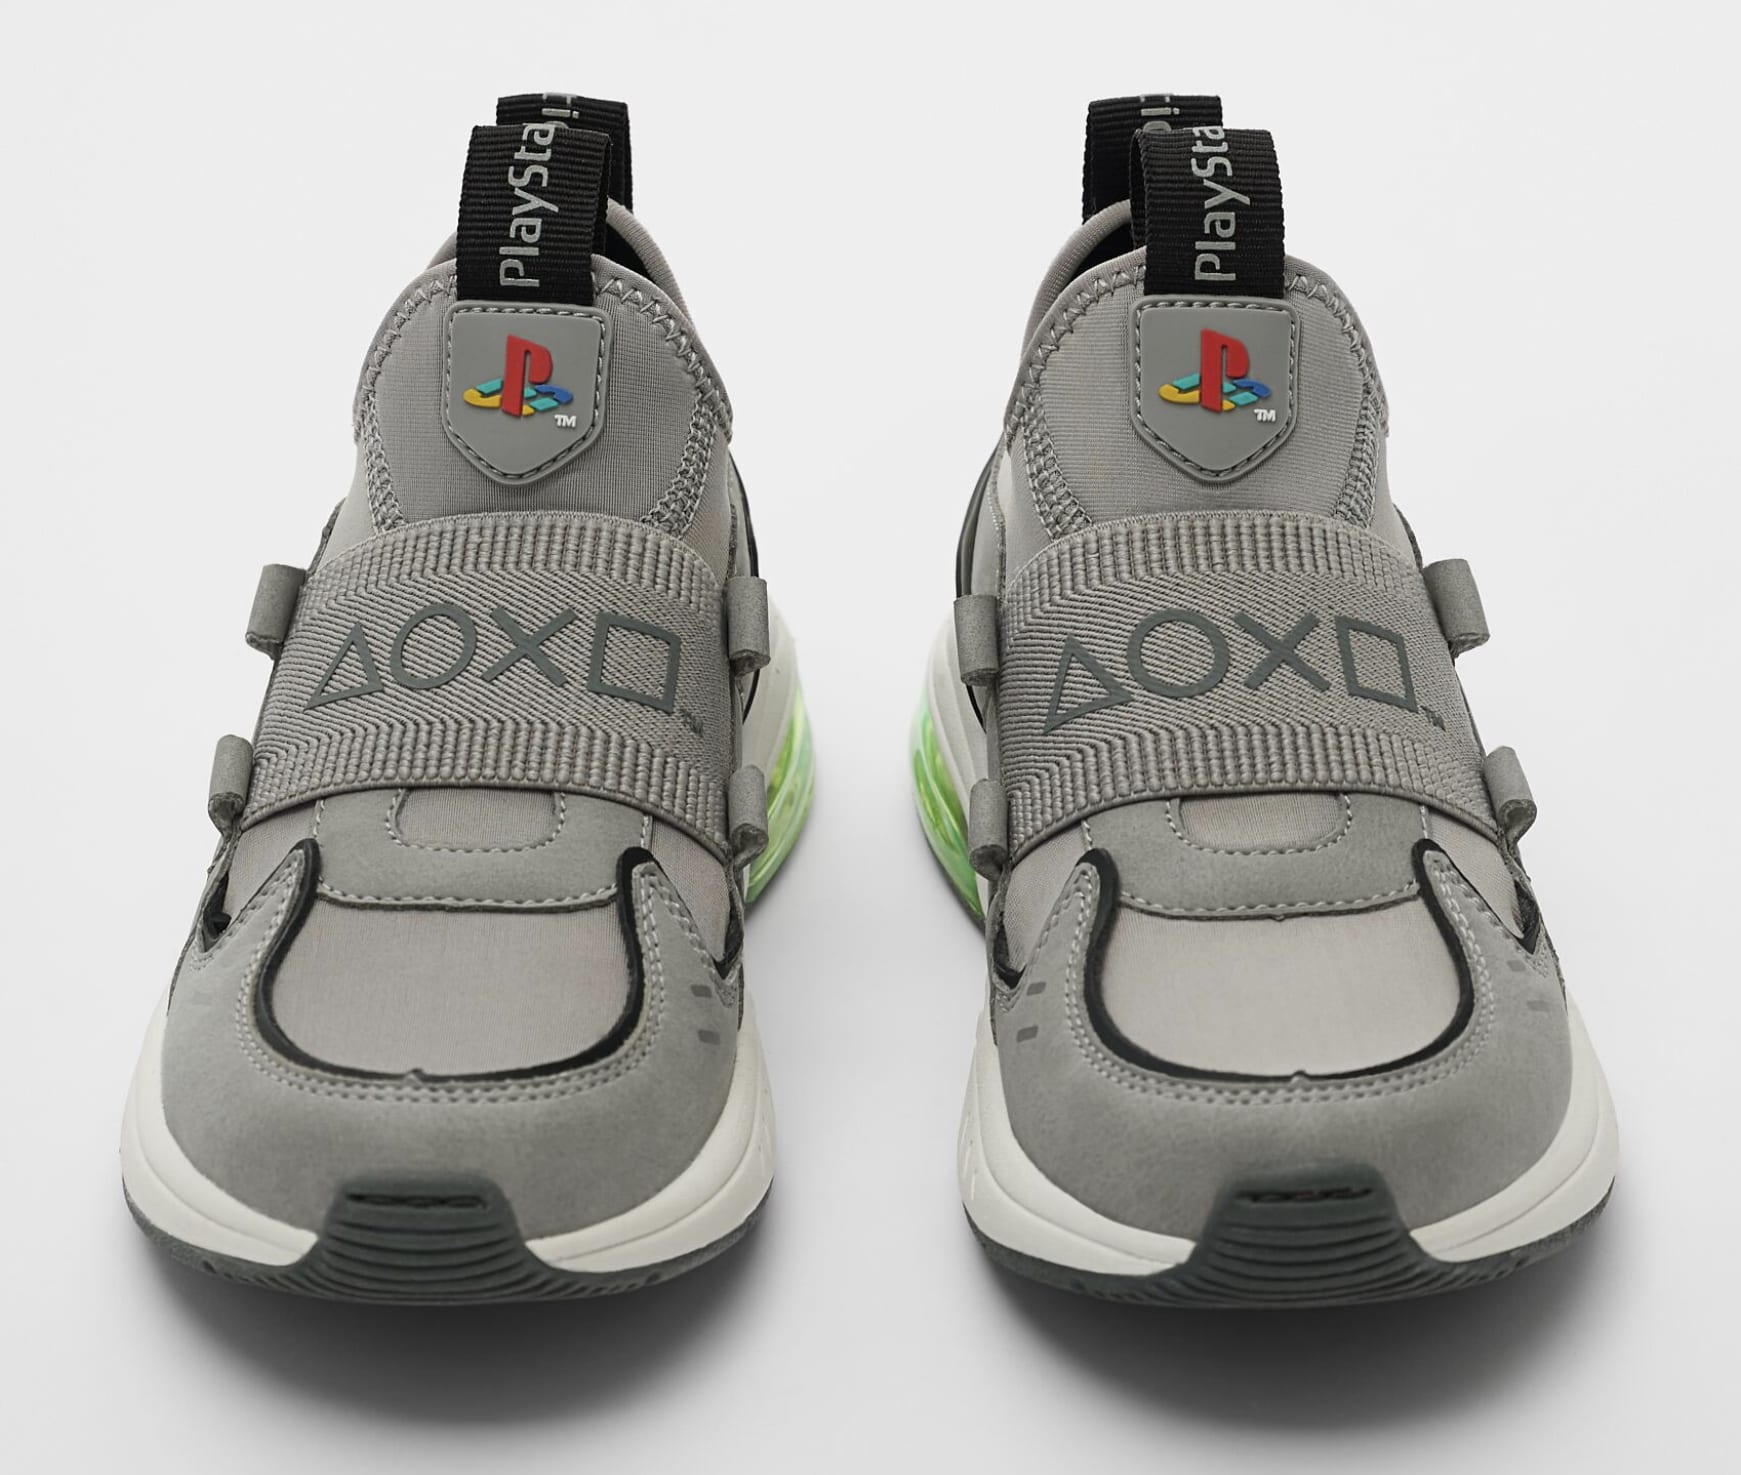 Sony x Zara Playstation Interactive Sneakers Front